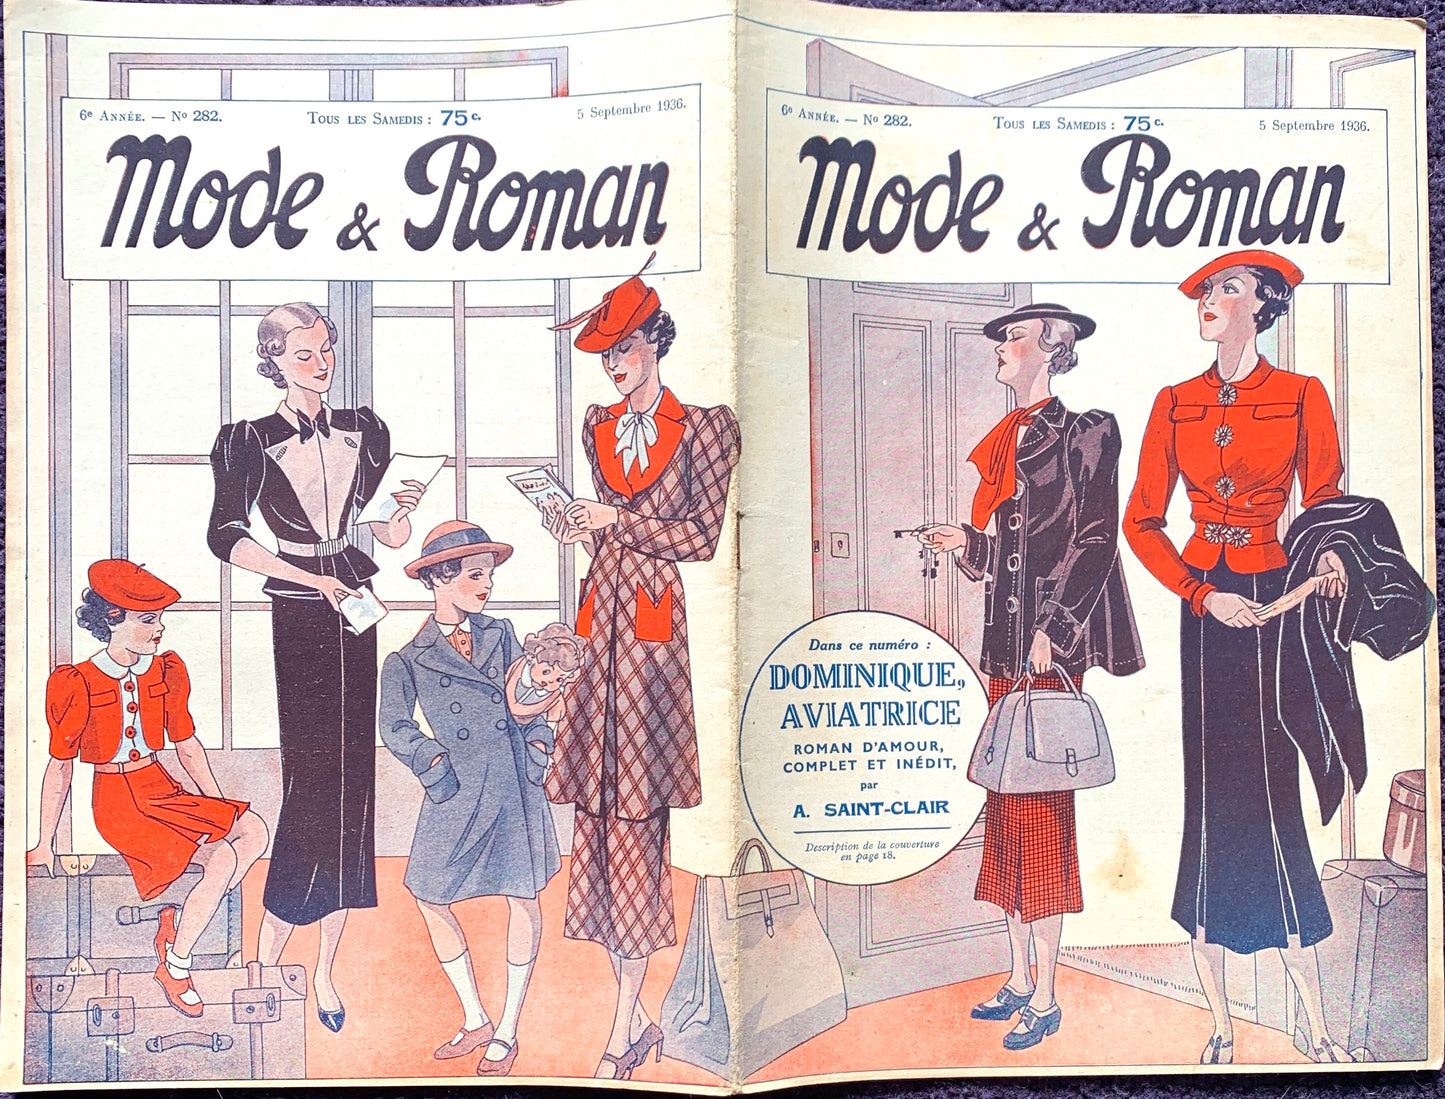 Arriving Home from Holiday on Cover of September 1936 French Magazine Mode & Roman